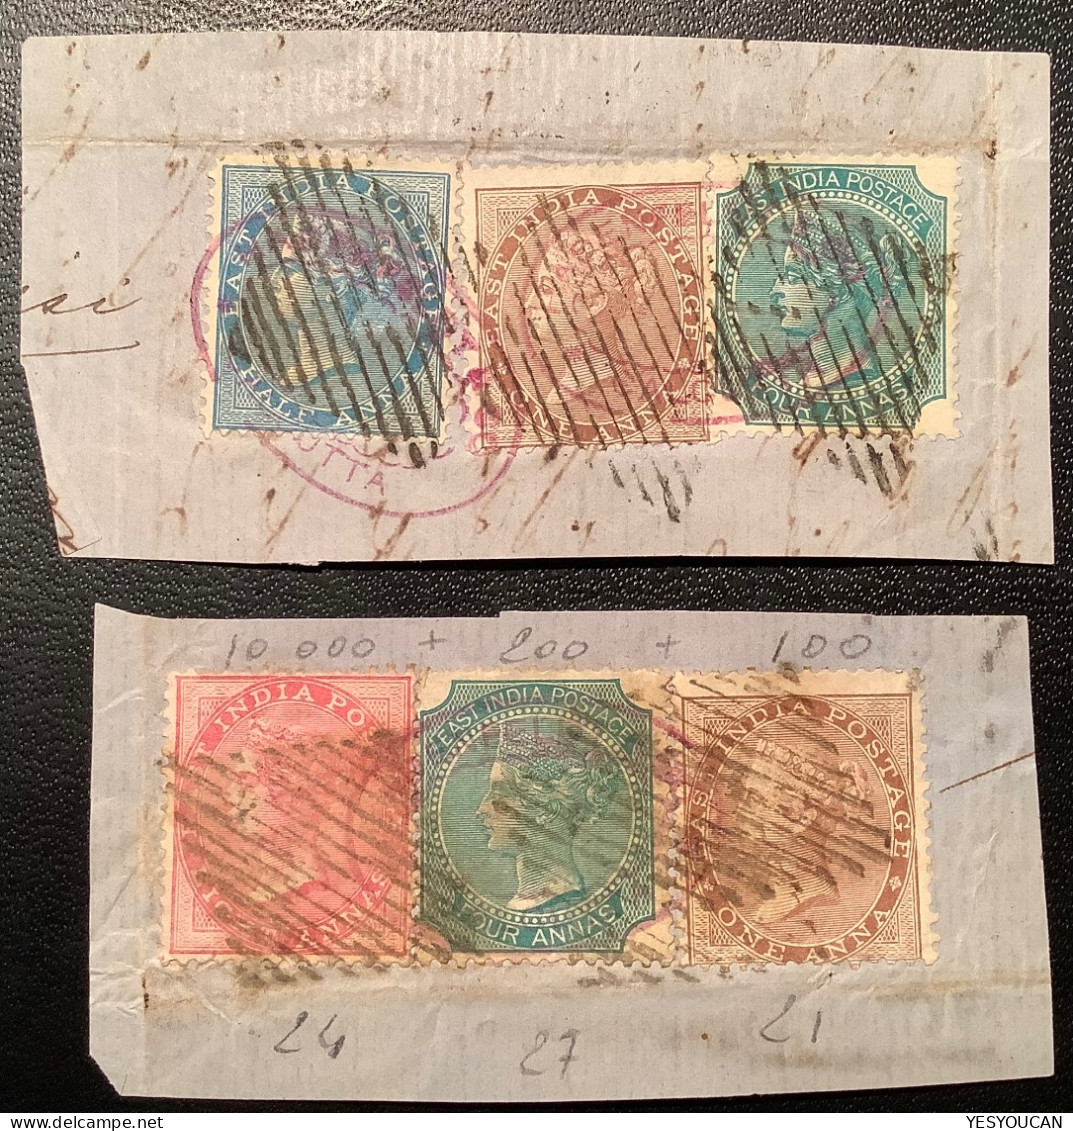 India 1865-1868 Two Scarce HADENFELDT &CO CALCUTTA Security Markings On Piece  (Queen Victoria - 1858-79 Crown Colony